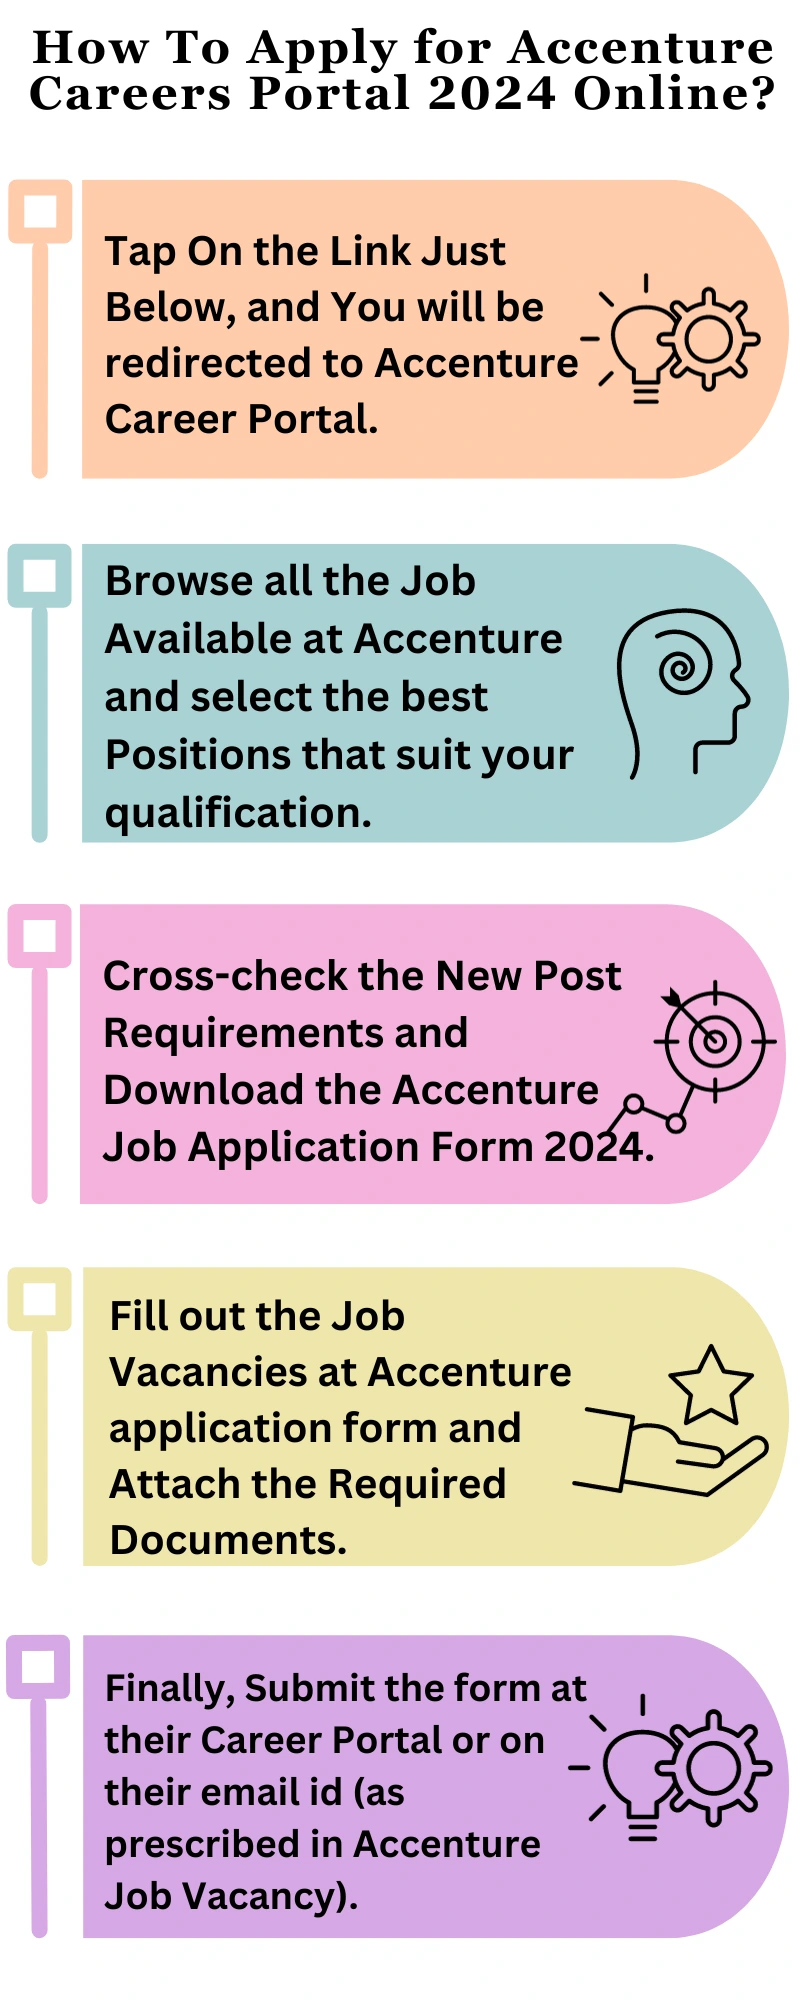 How To Apply for Accenture Careers Portal 2024 Online?